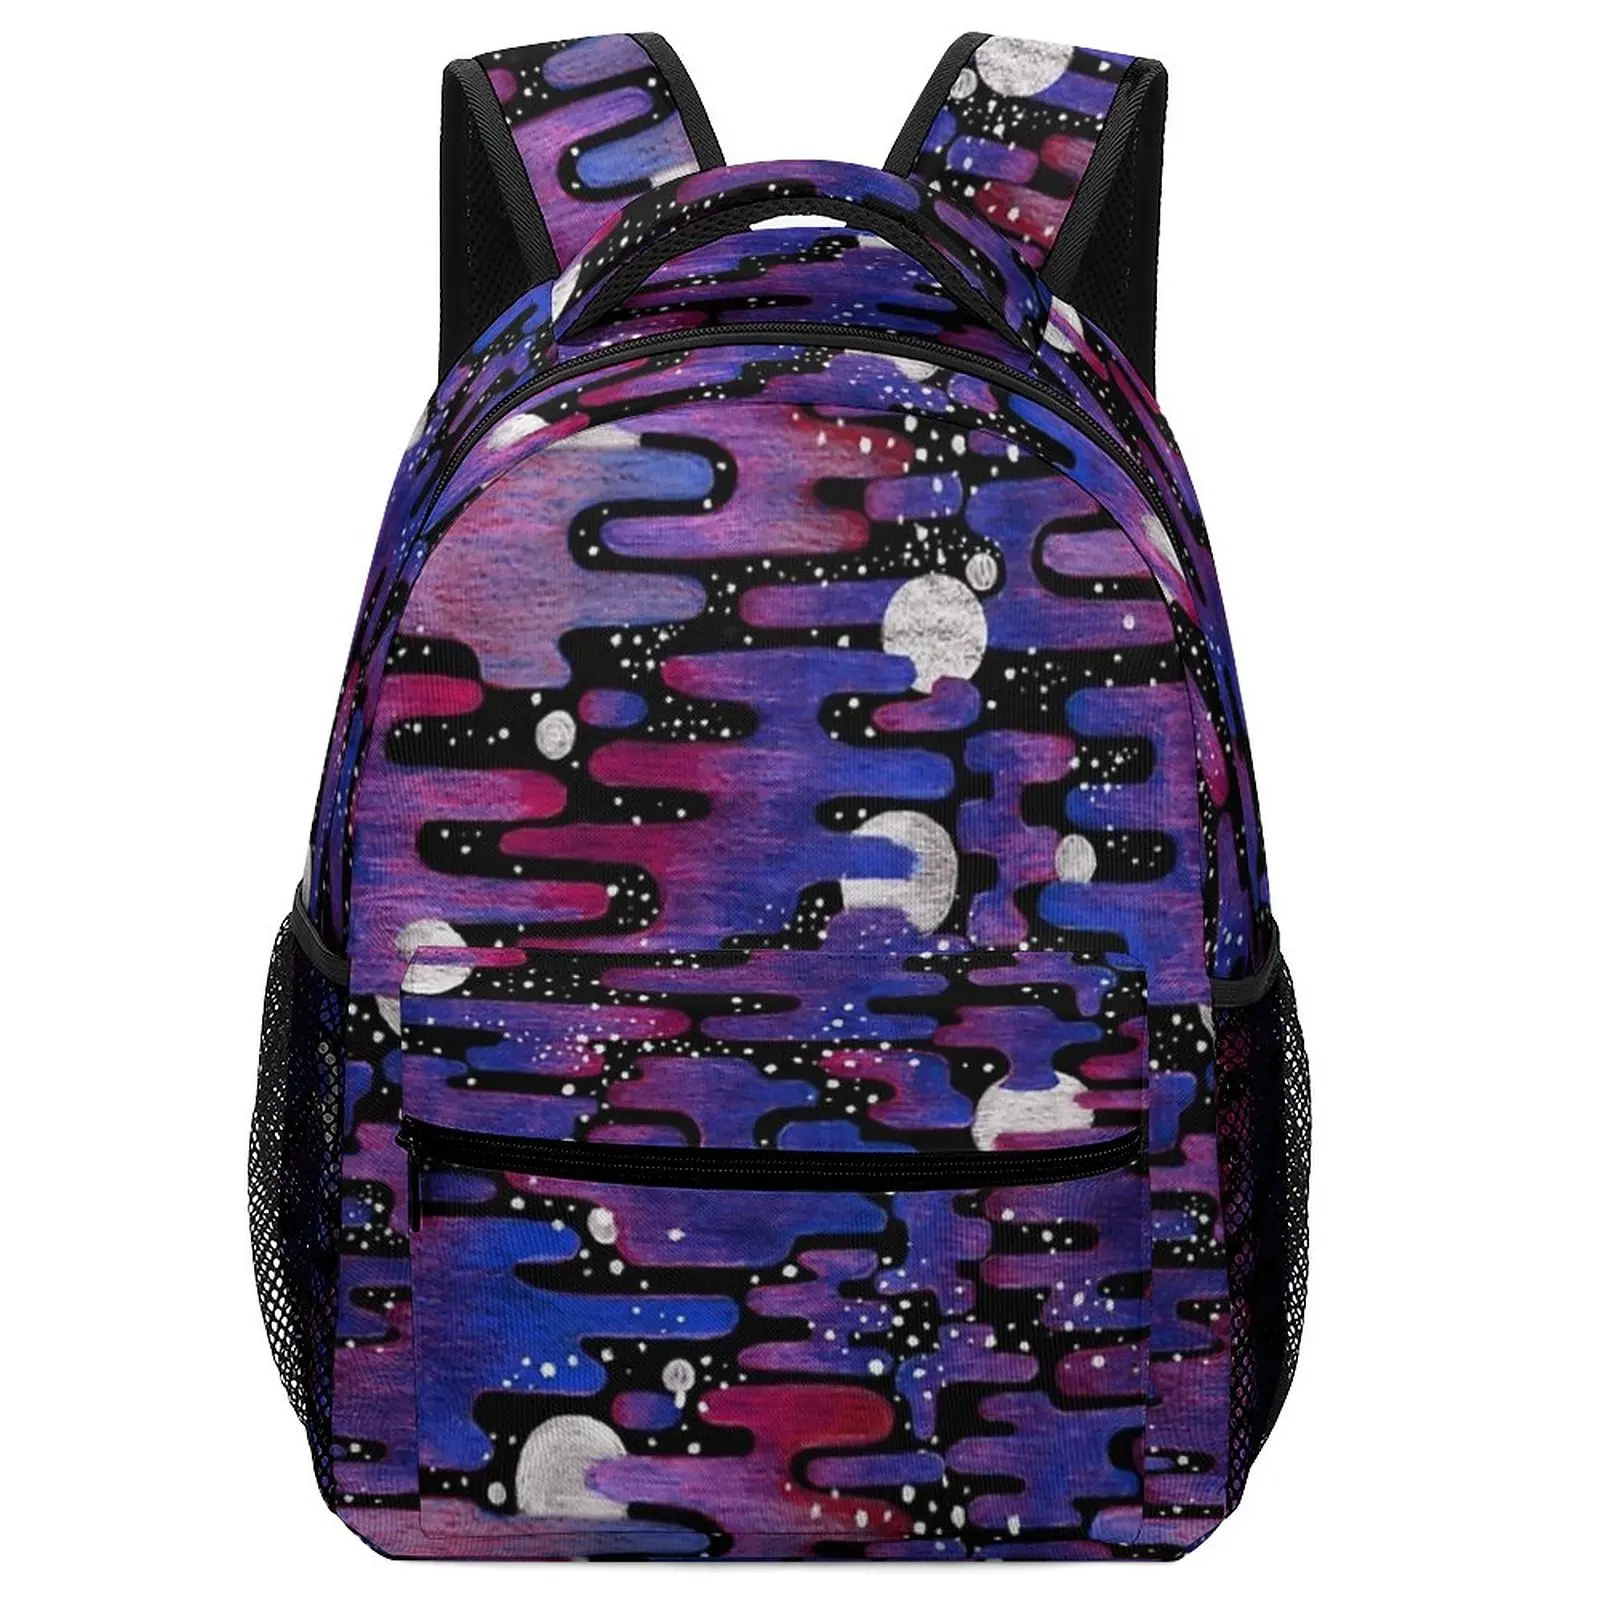 Fashion Sunsets on Other Planets Funny School Bags 2022 Kids for Boys Children School Bag for Teenagers Cute Backpack Accessorie